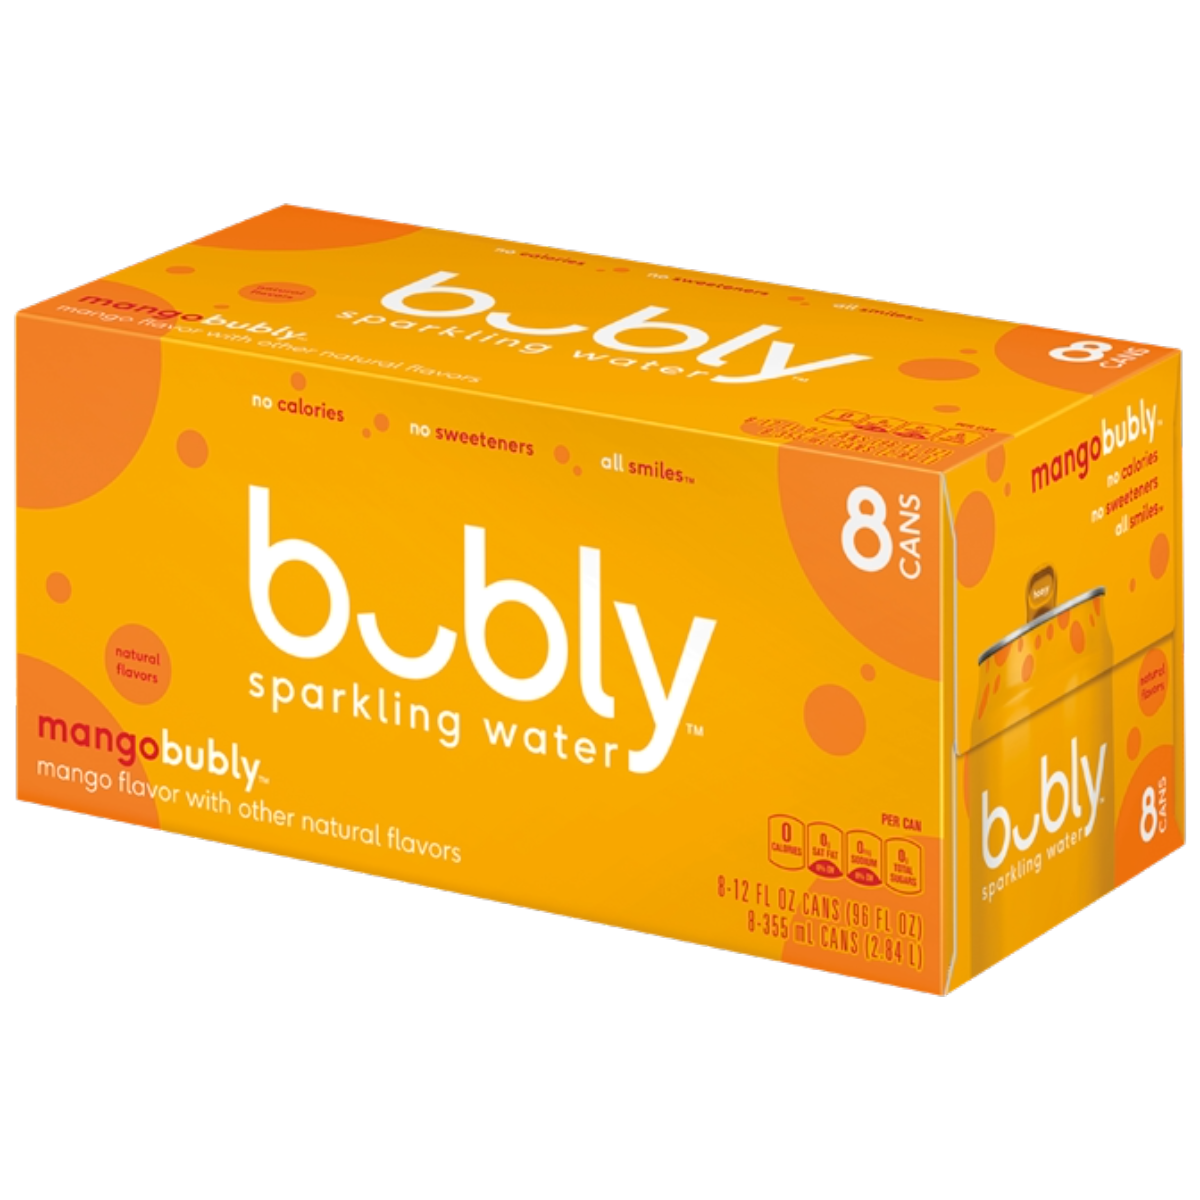 BUBLY SPARKLING WATER MANGO